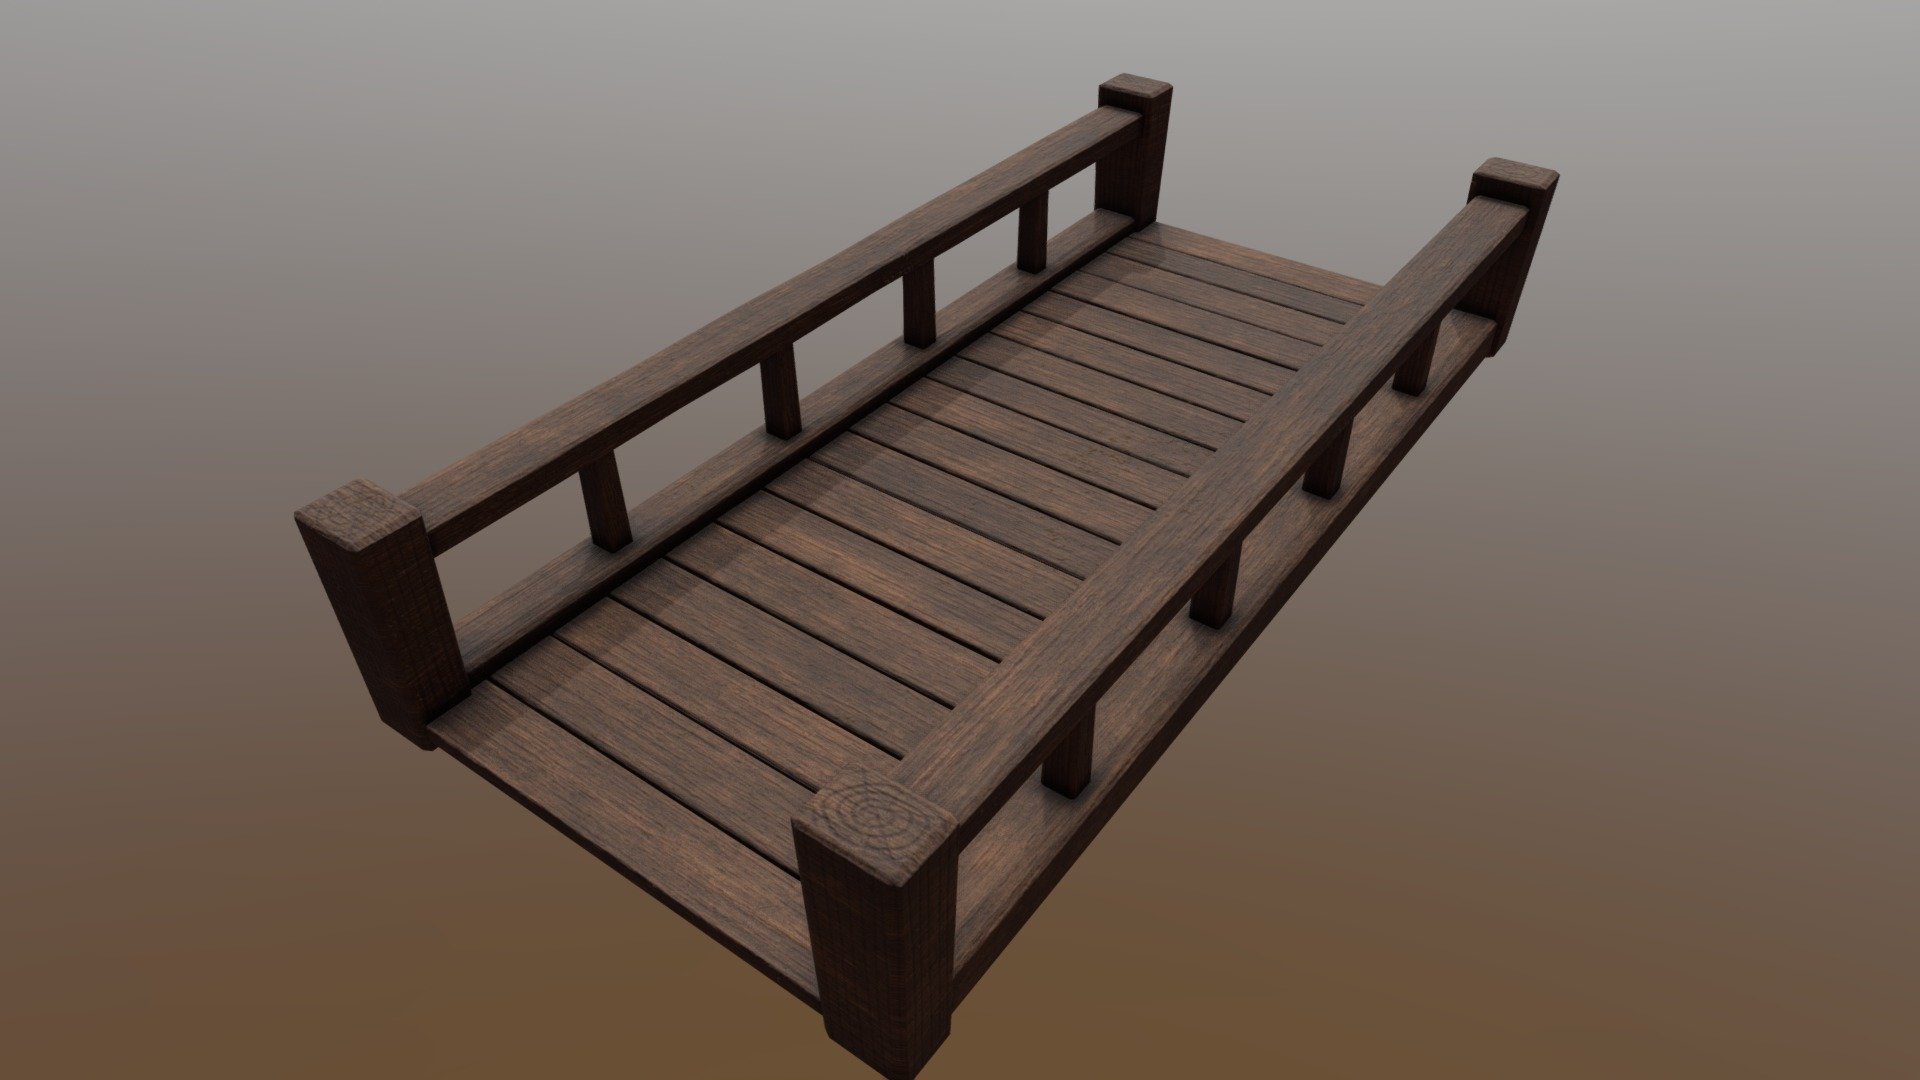 I didn't spend a lot of time making this. it was a simple Bridge from one of my old projects. it was a background asset on the project so I didn't spend a lot of time on detailed texturing. you can use this for your commercial or personal uses if you need it 3d model